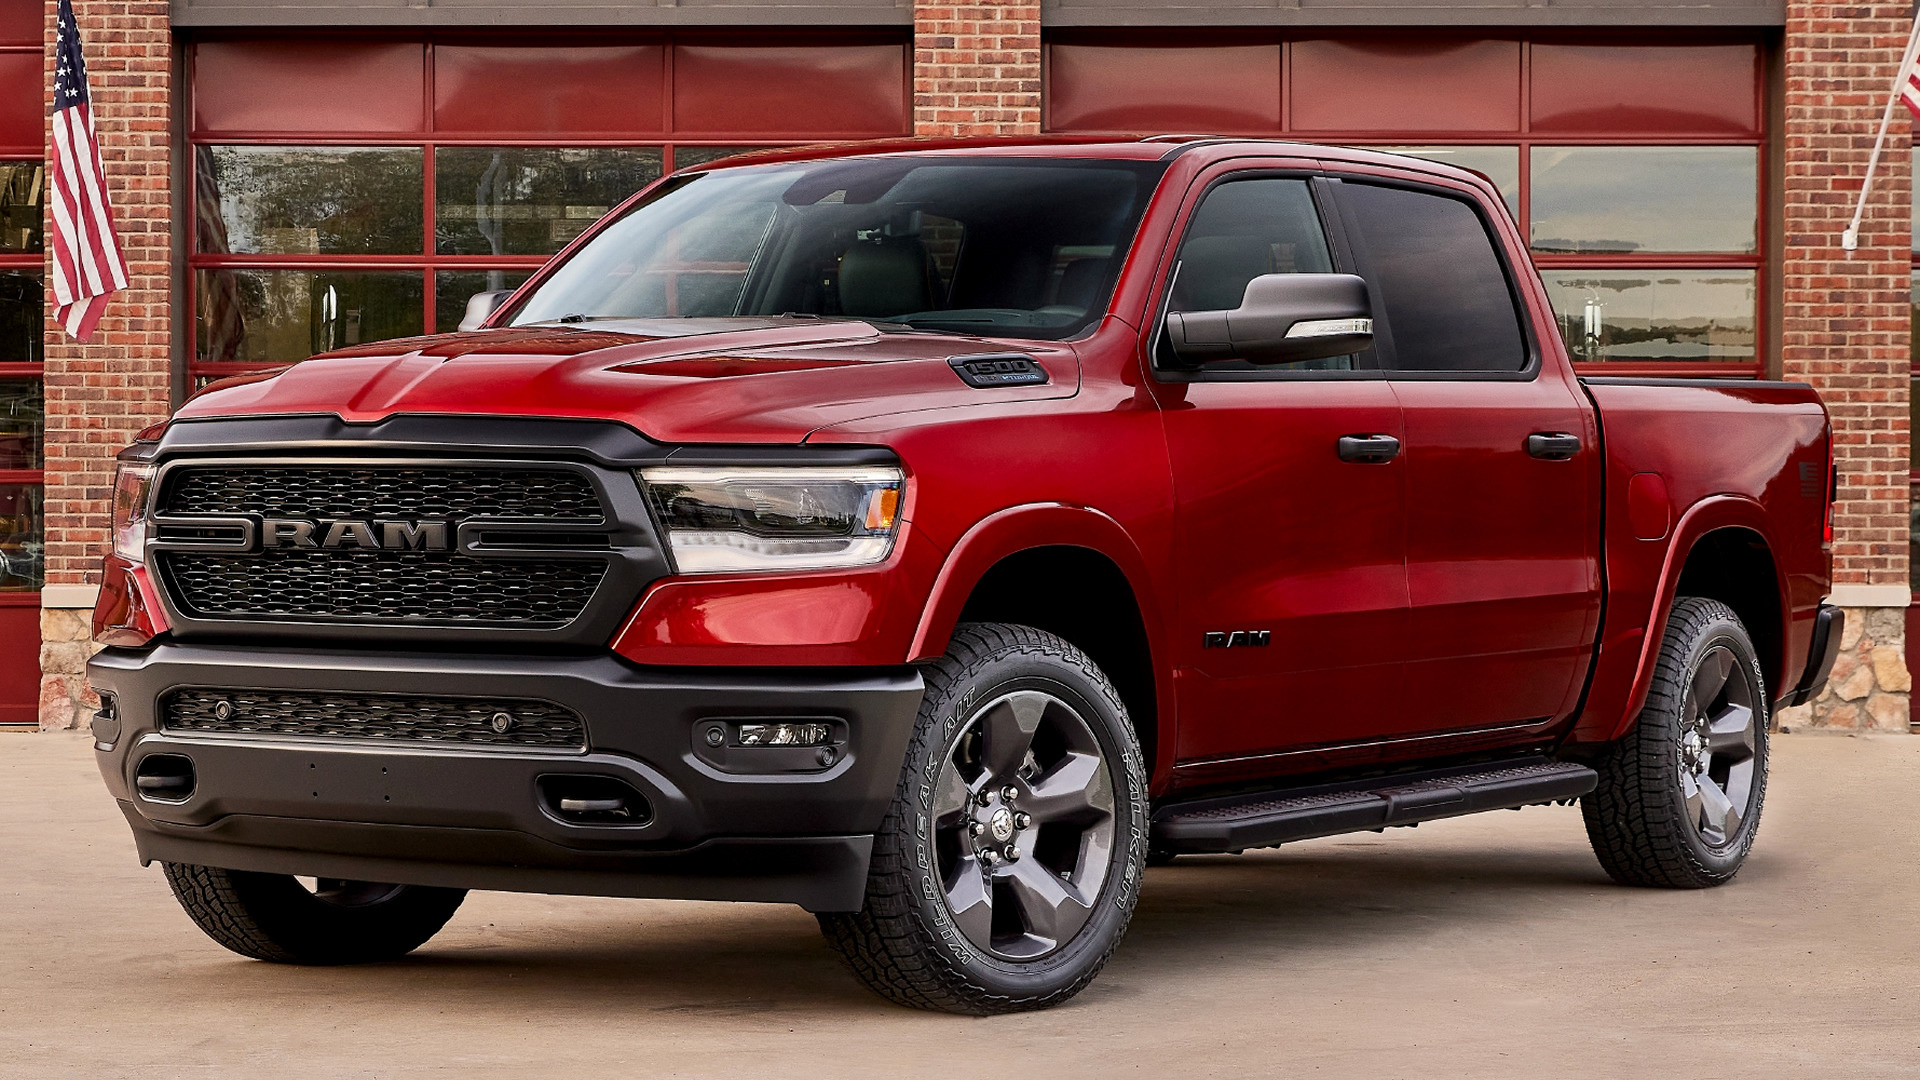 2022 Ram 1500 Big Horn Crew Cab Built to Serve Edition Wallpapers and